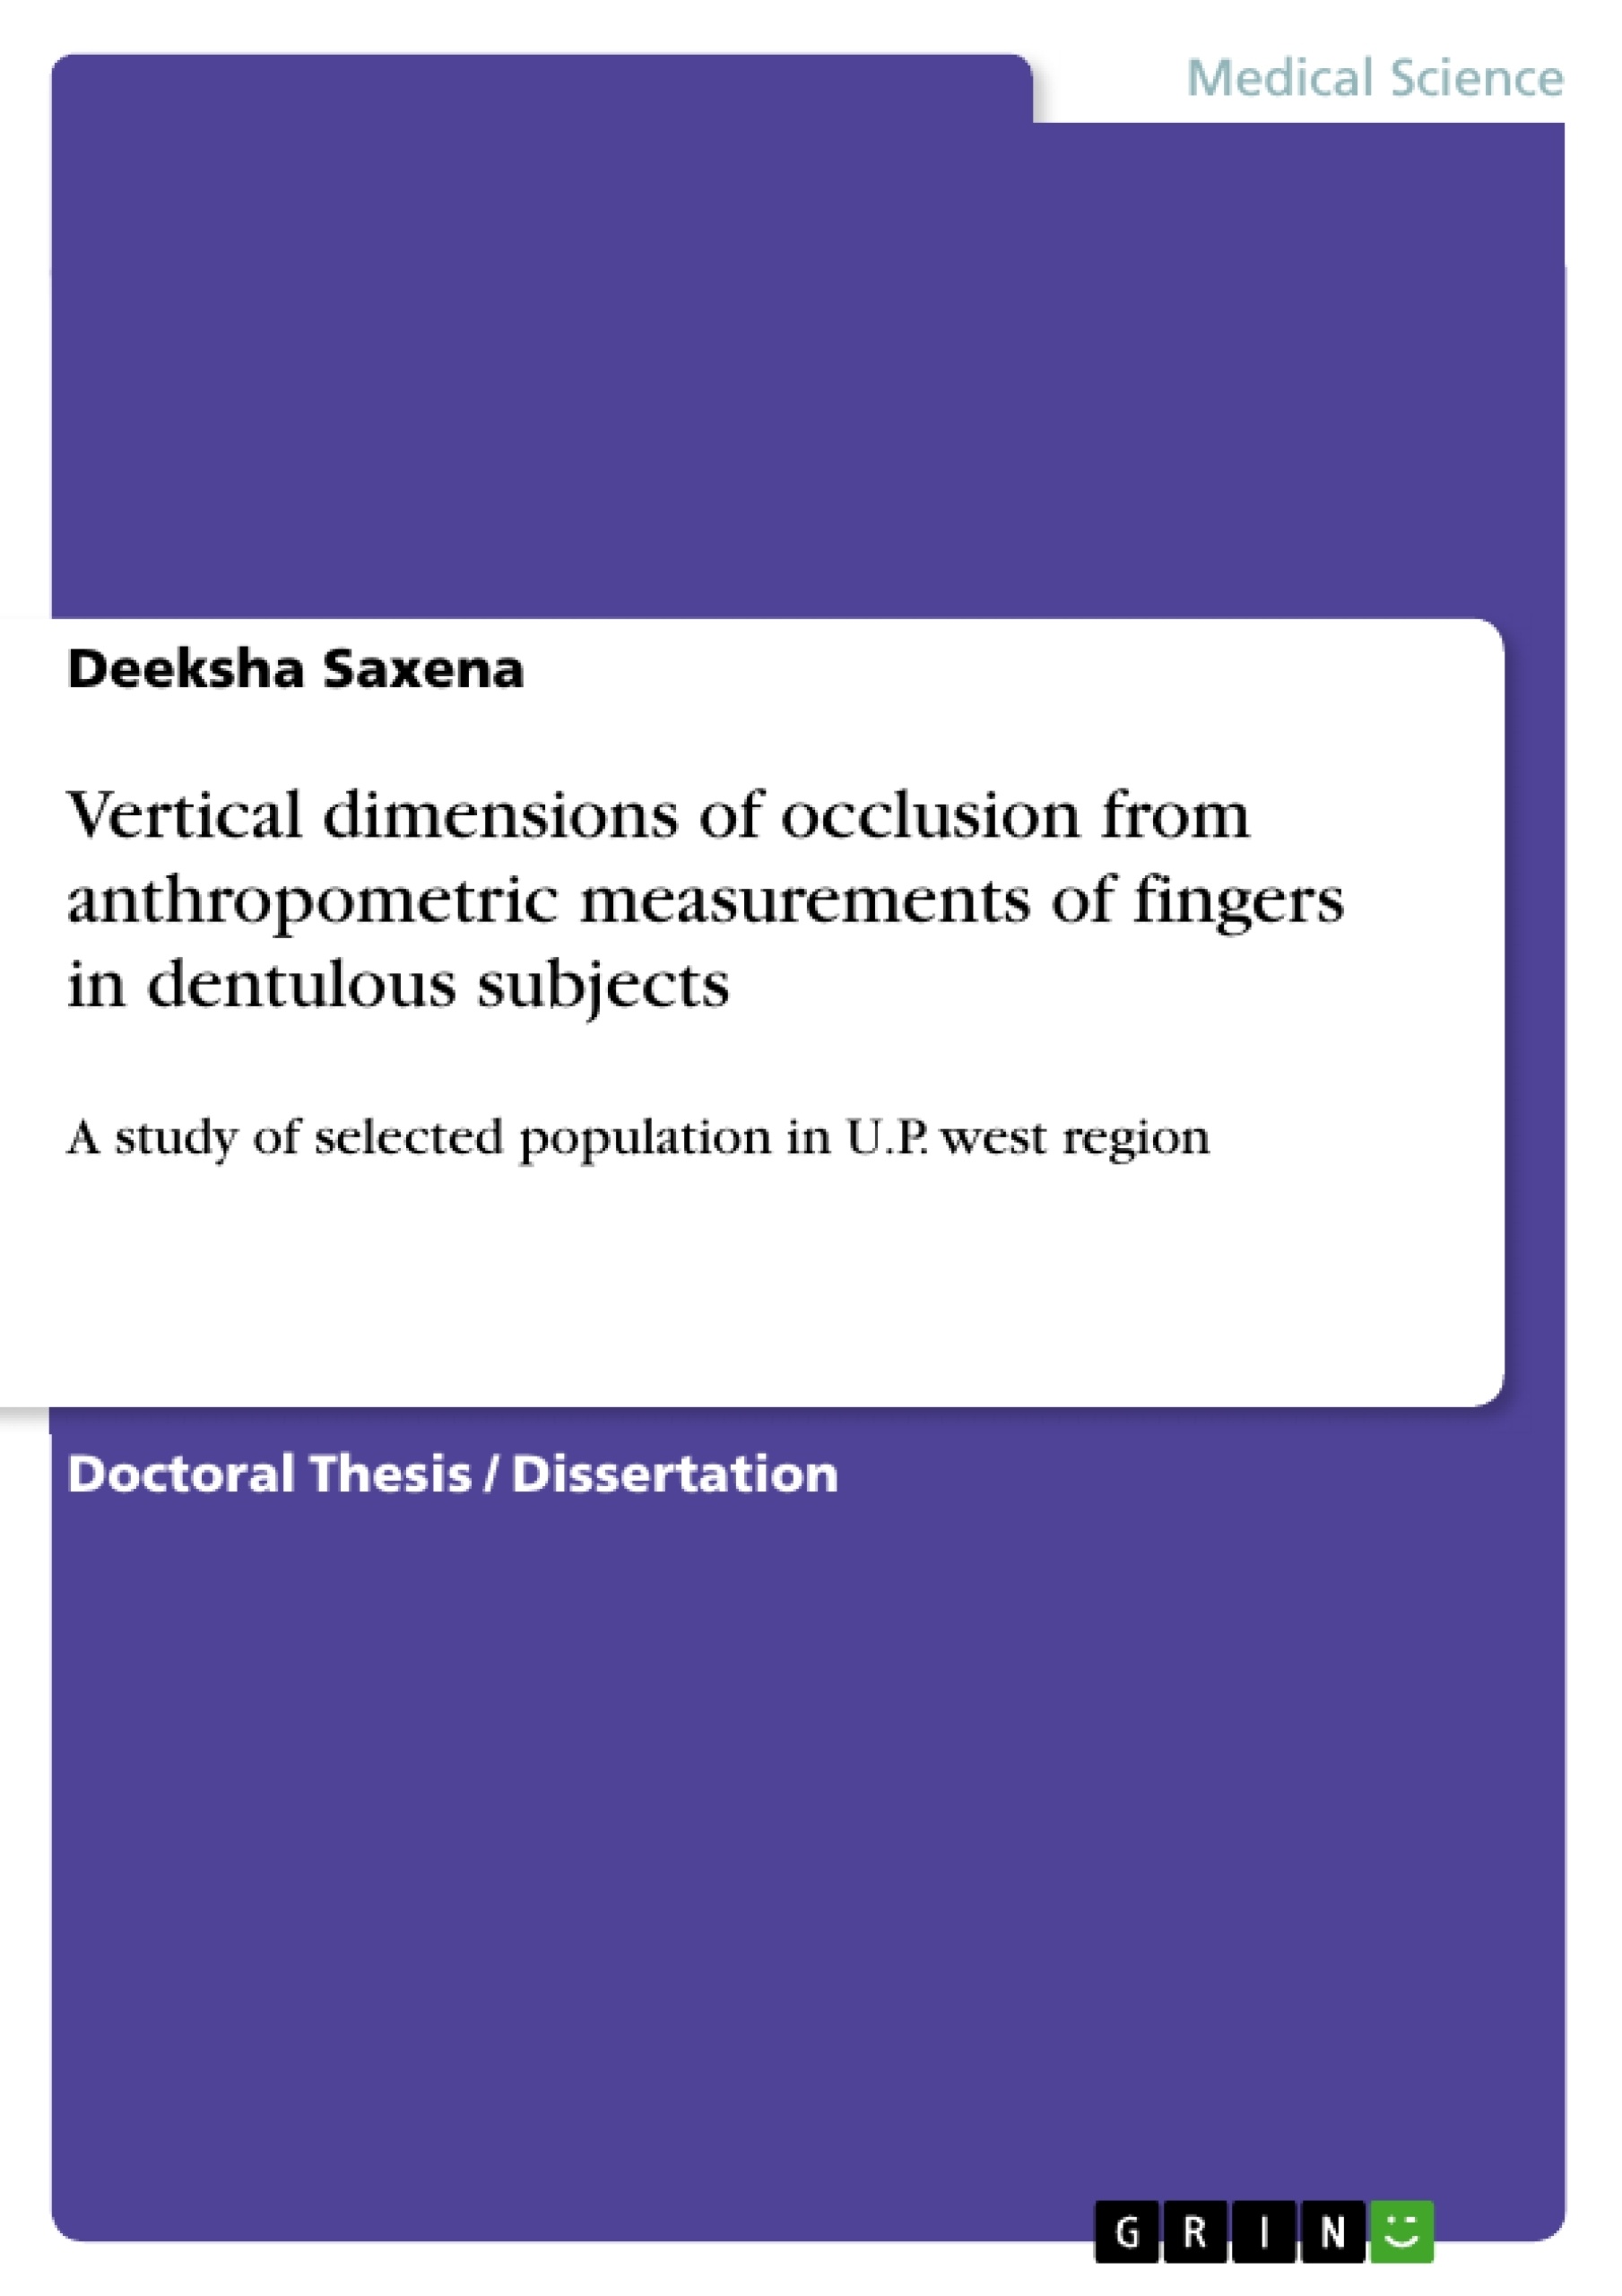 Título: Vertical dimensions of occlusion from anthropometric measurements of fingers in dentulous subjects